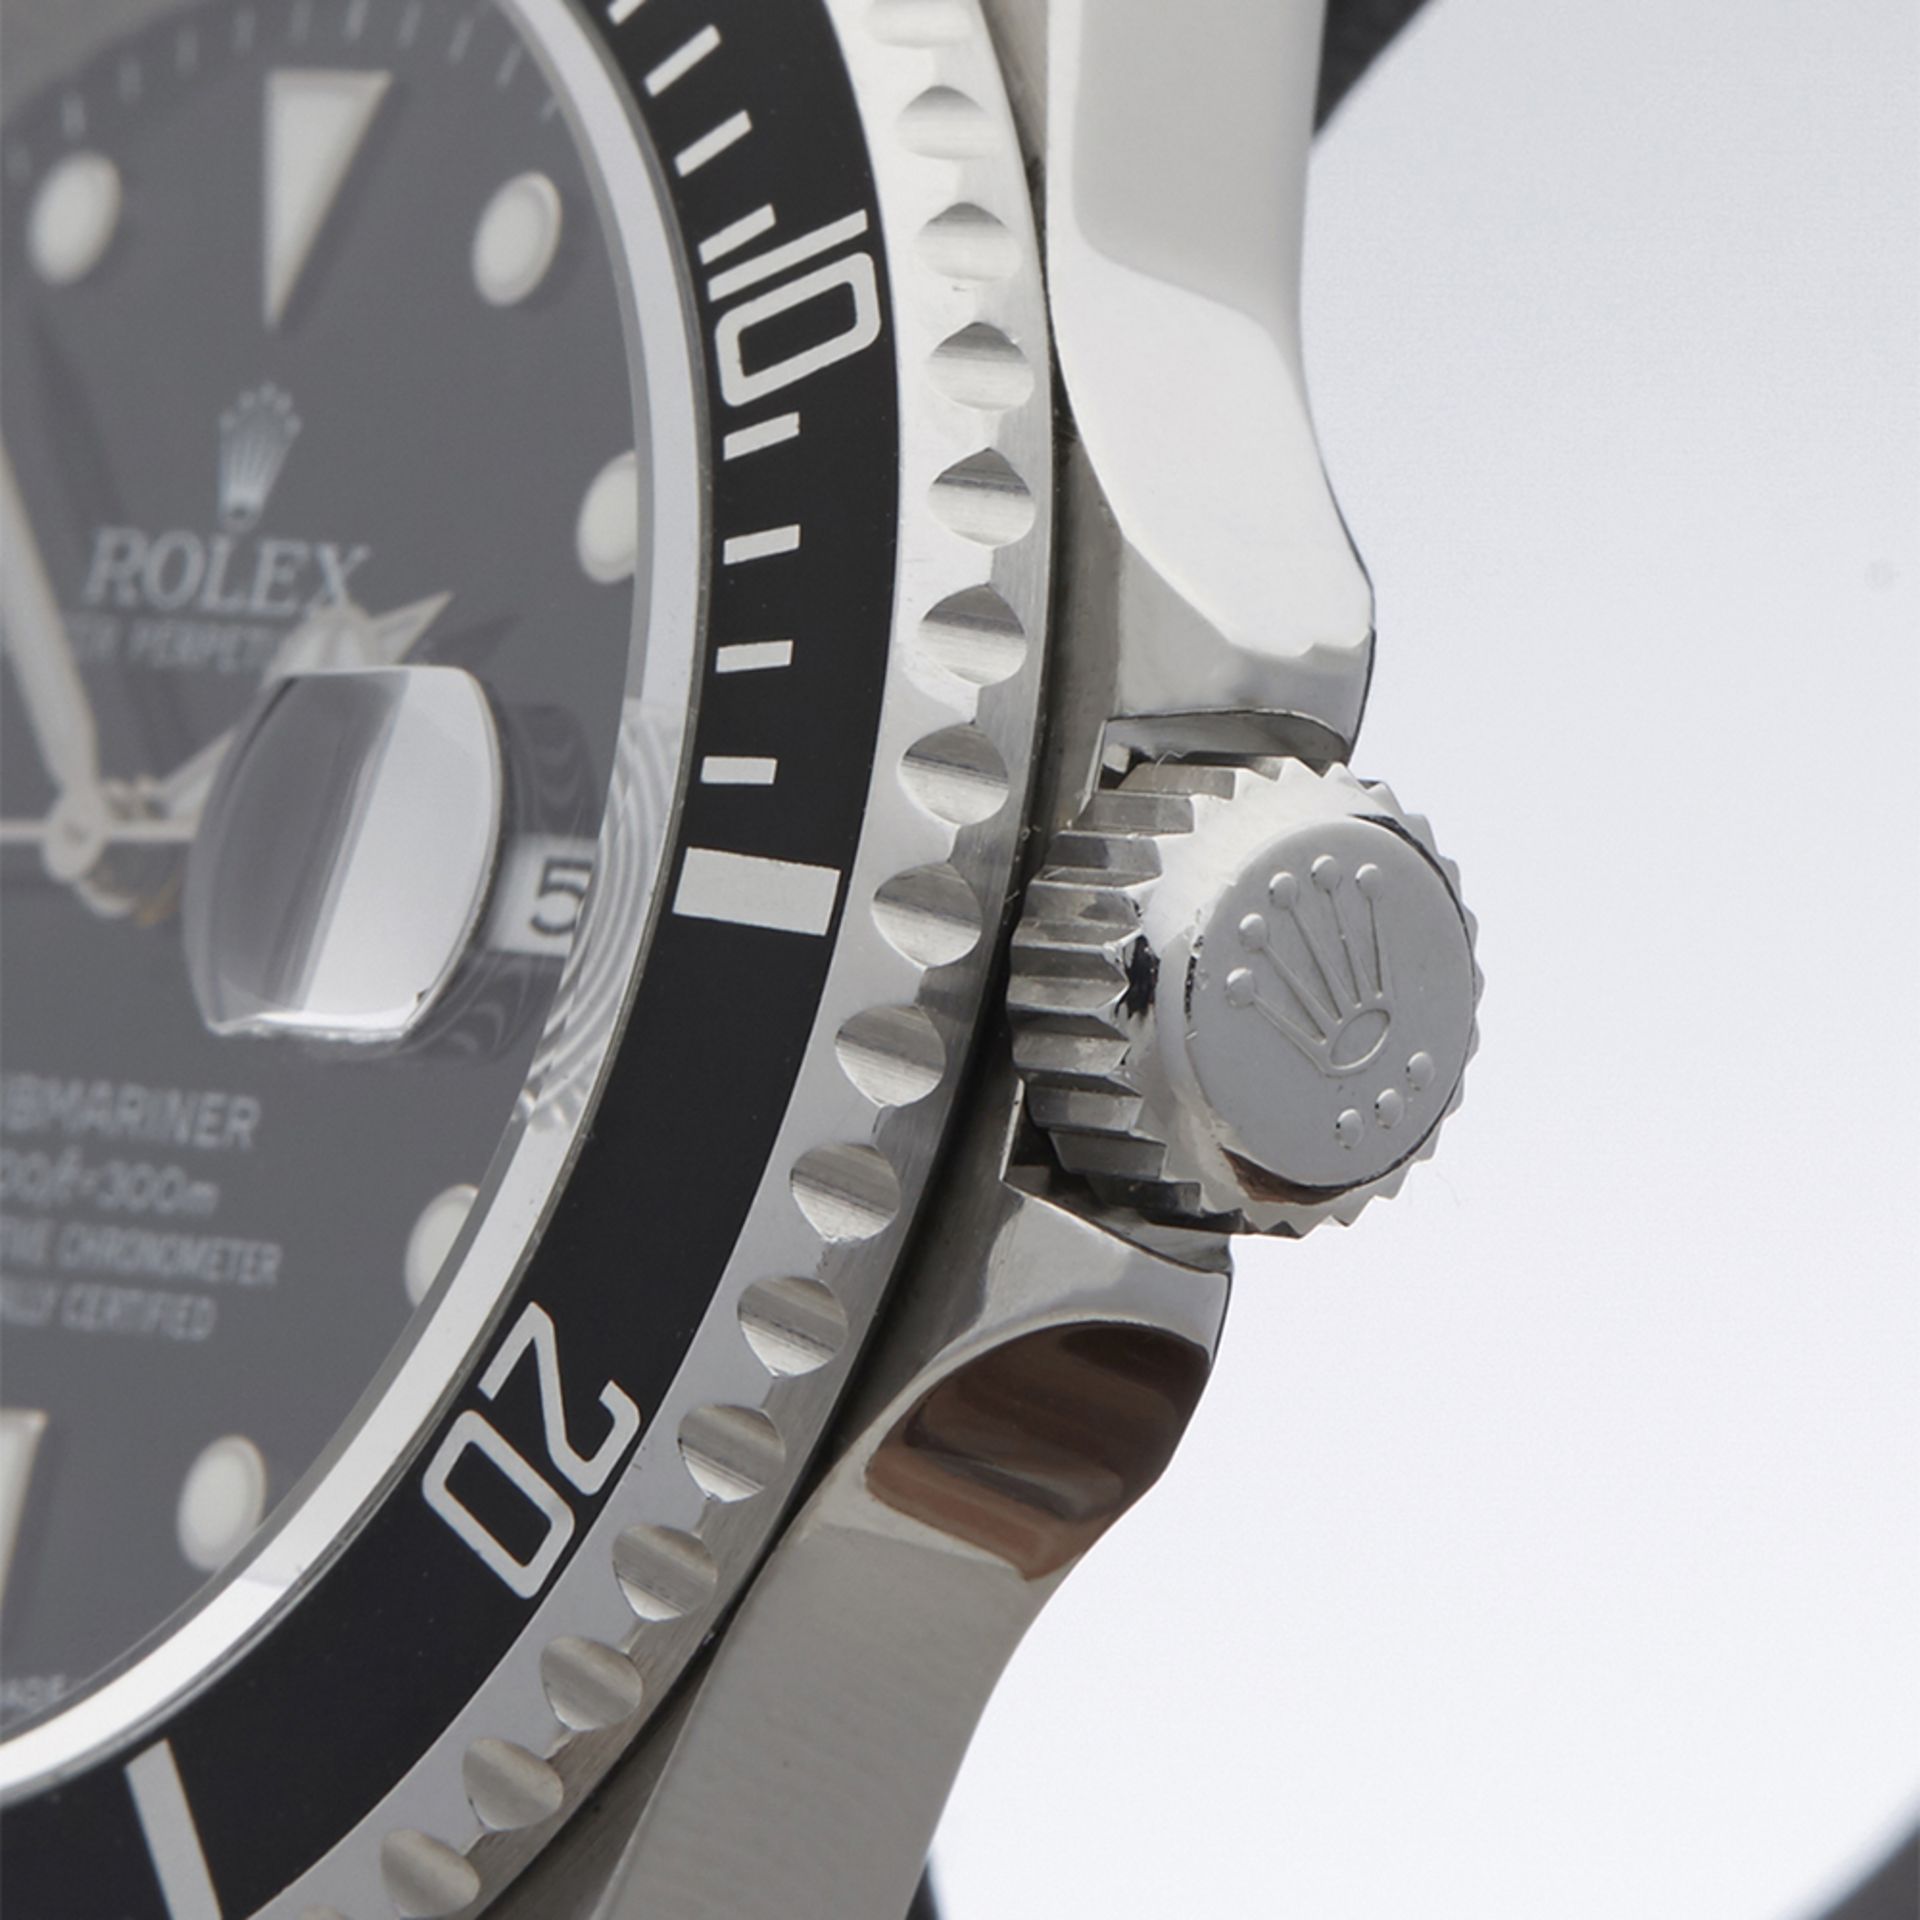 Submariner 40mm Stainless Steel - 16610LN - Image 4 of 9